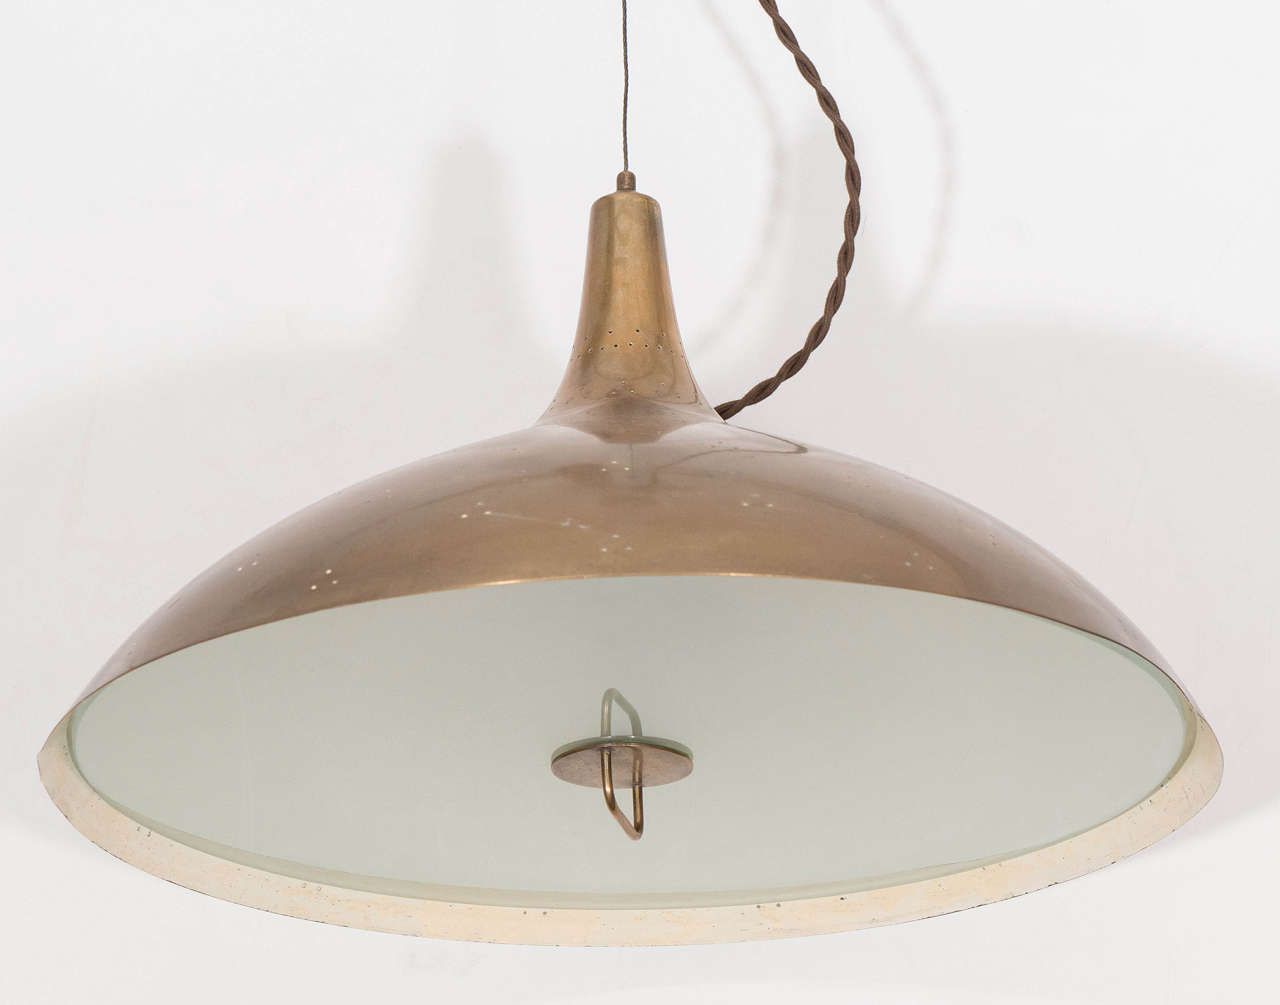 A counter balance pendant lamp, produced in Finland, circa 1950s by designer Paavo Tynell, including a unique pulley, to adjust the height of the light fixture from the ceiling, which suspends a brass bell-form shade, decorated with perforated